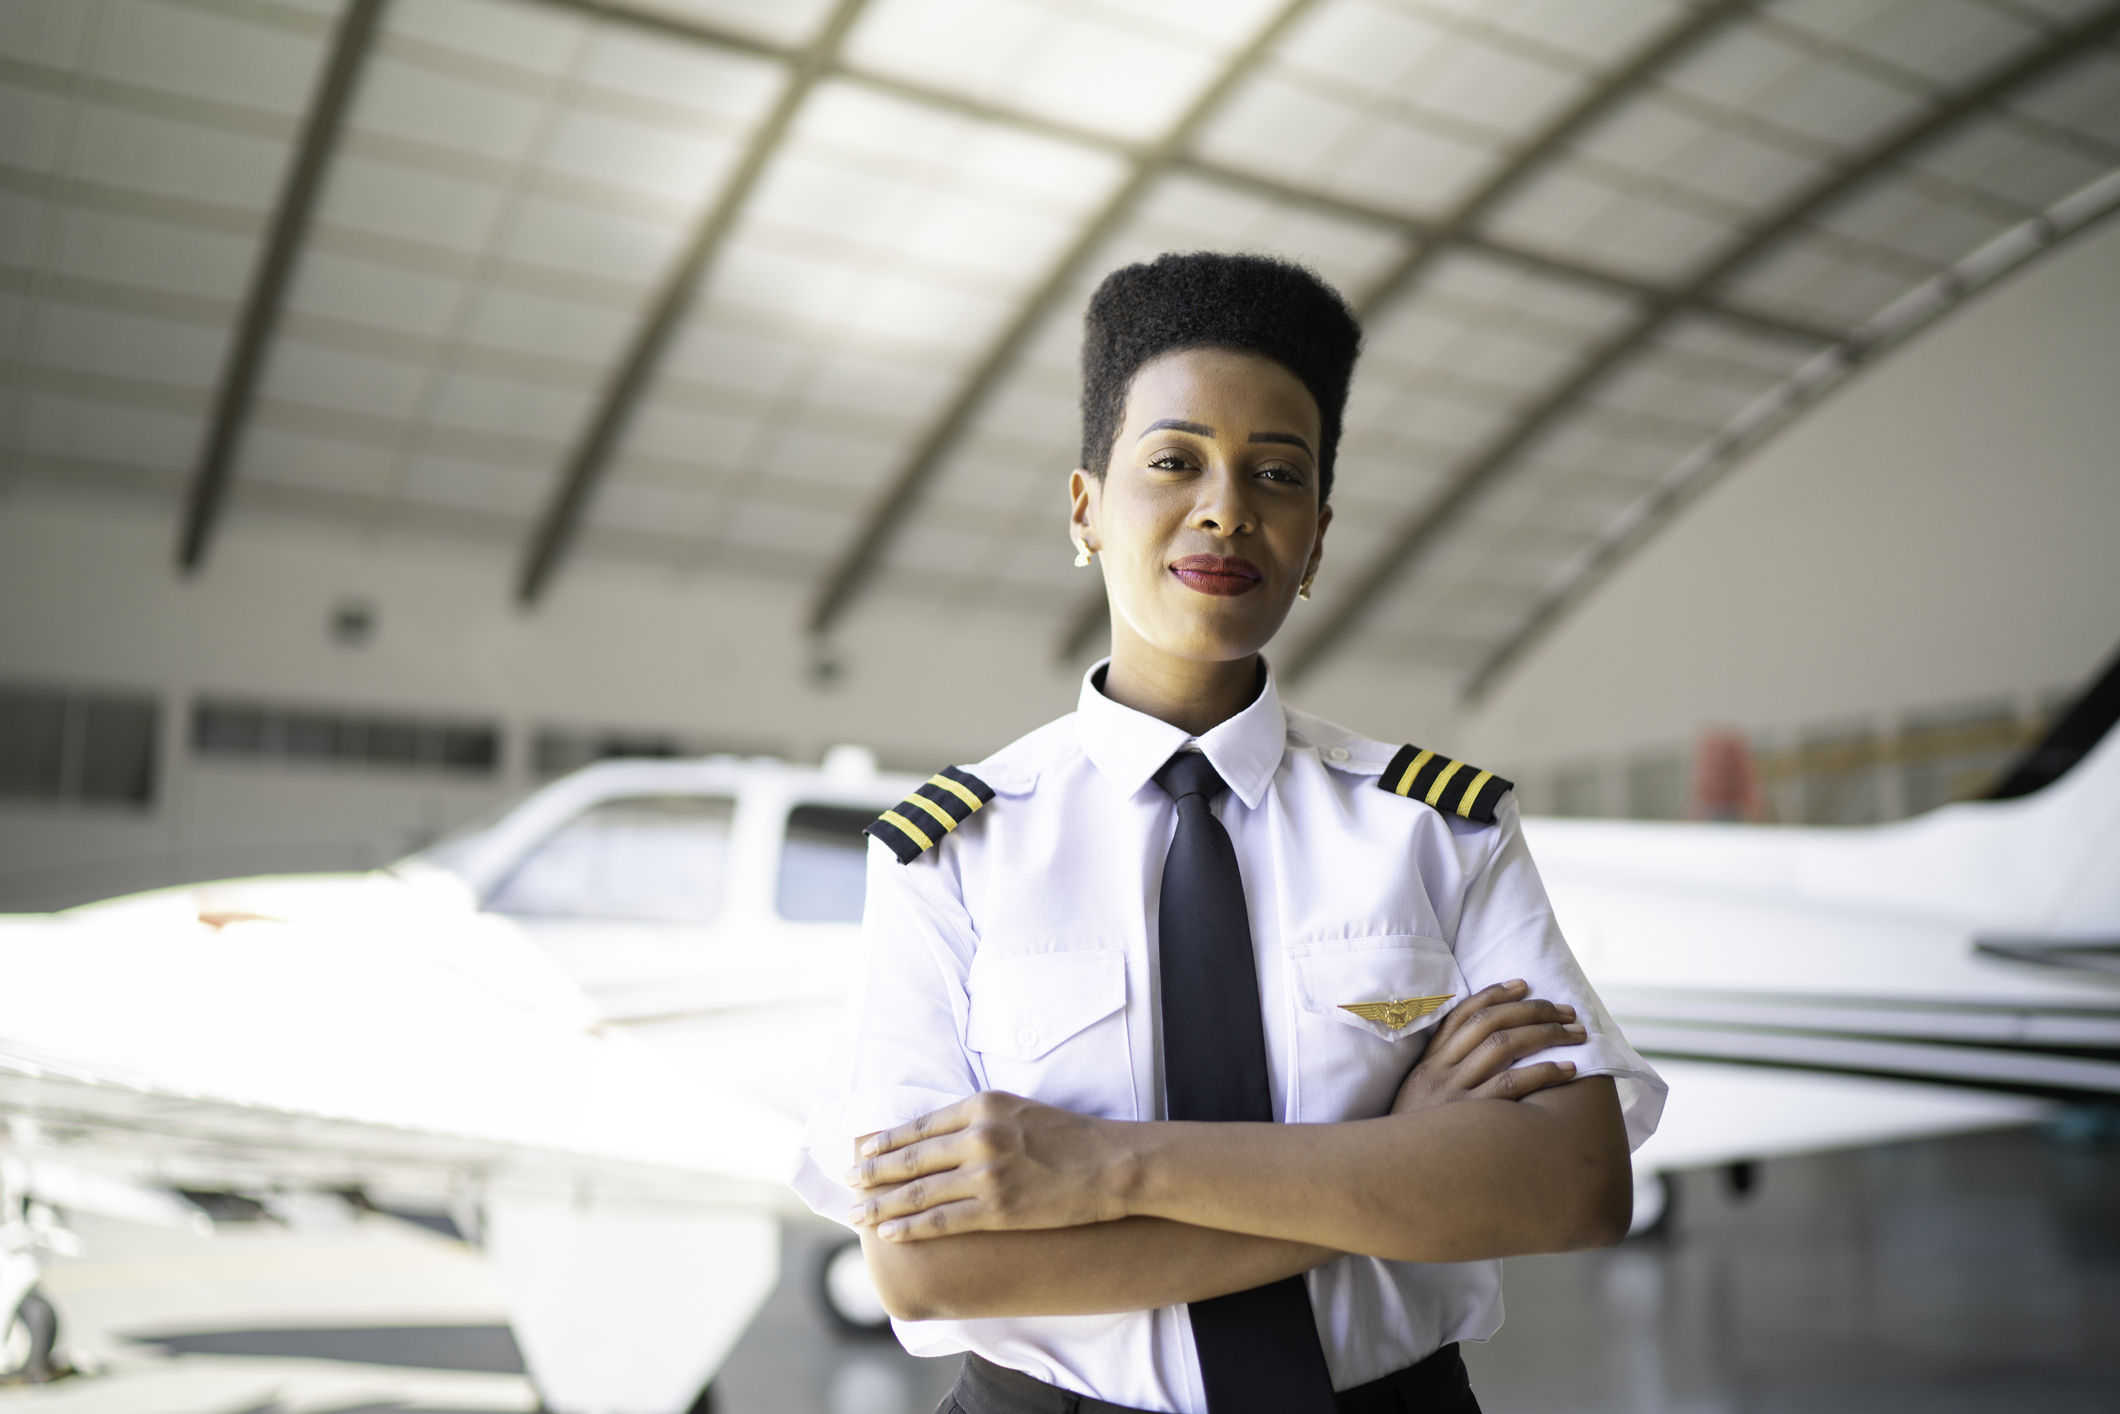 United Airlines Pledges $1.2M To Ensuring  50% Of Graduates From Its Flight School Are Women Or People Of Color